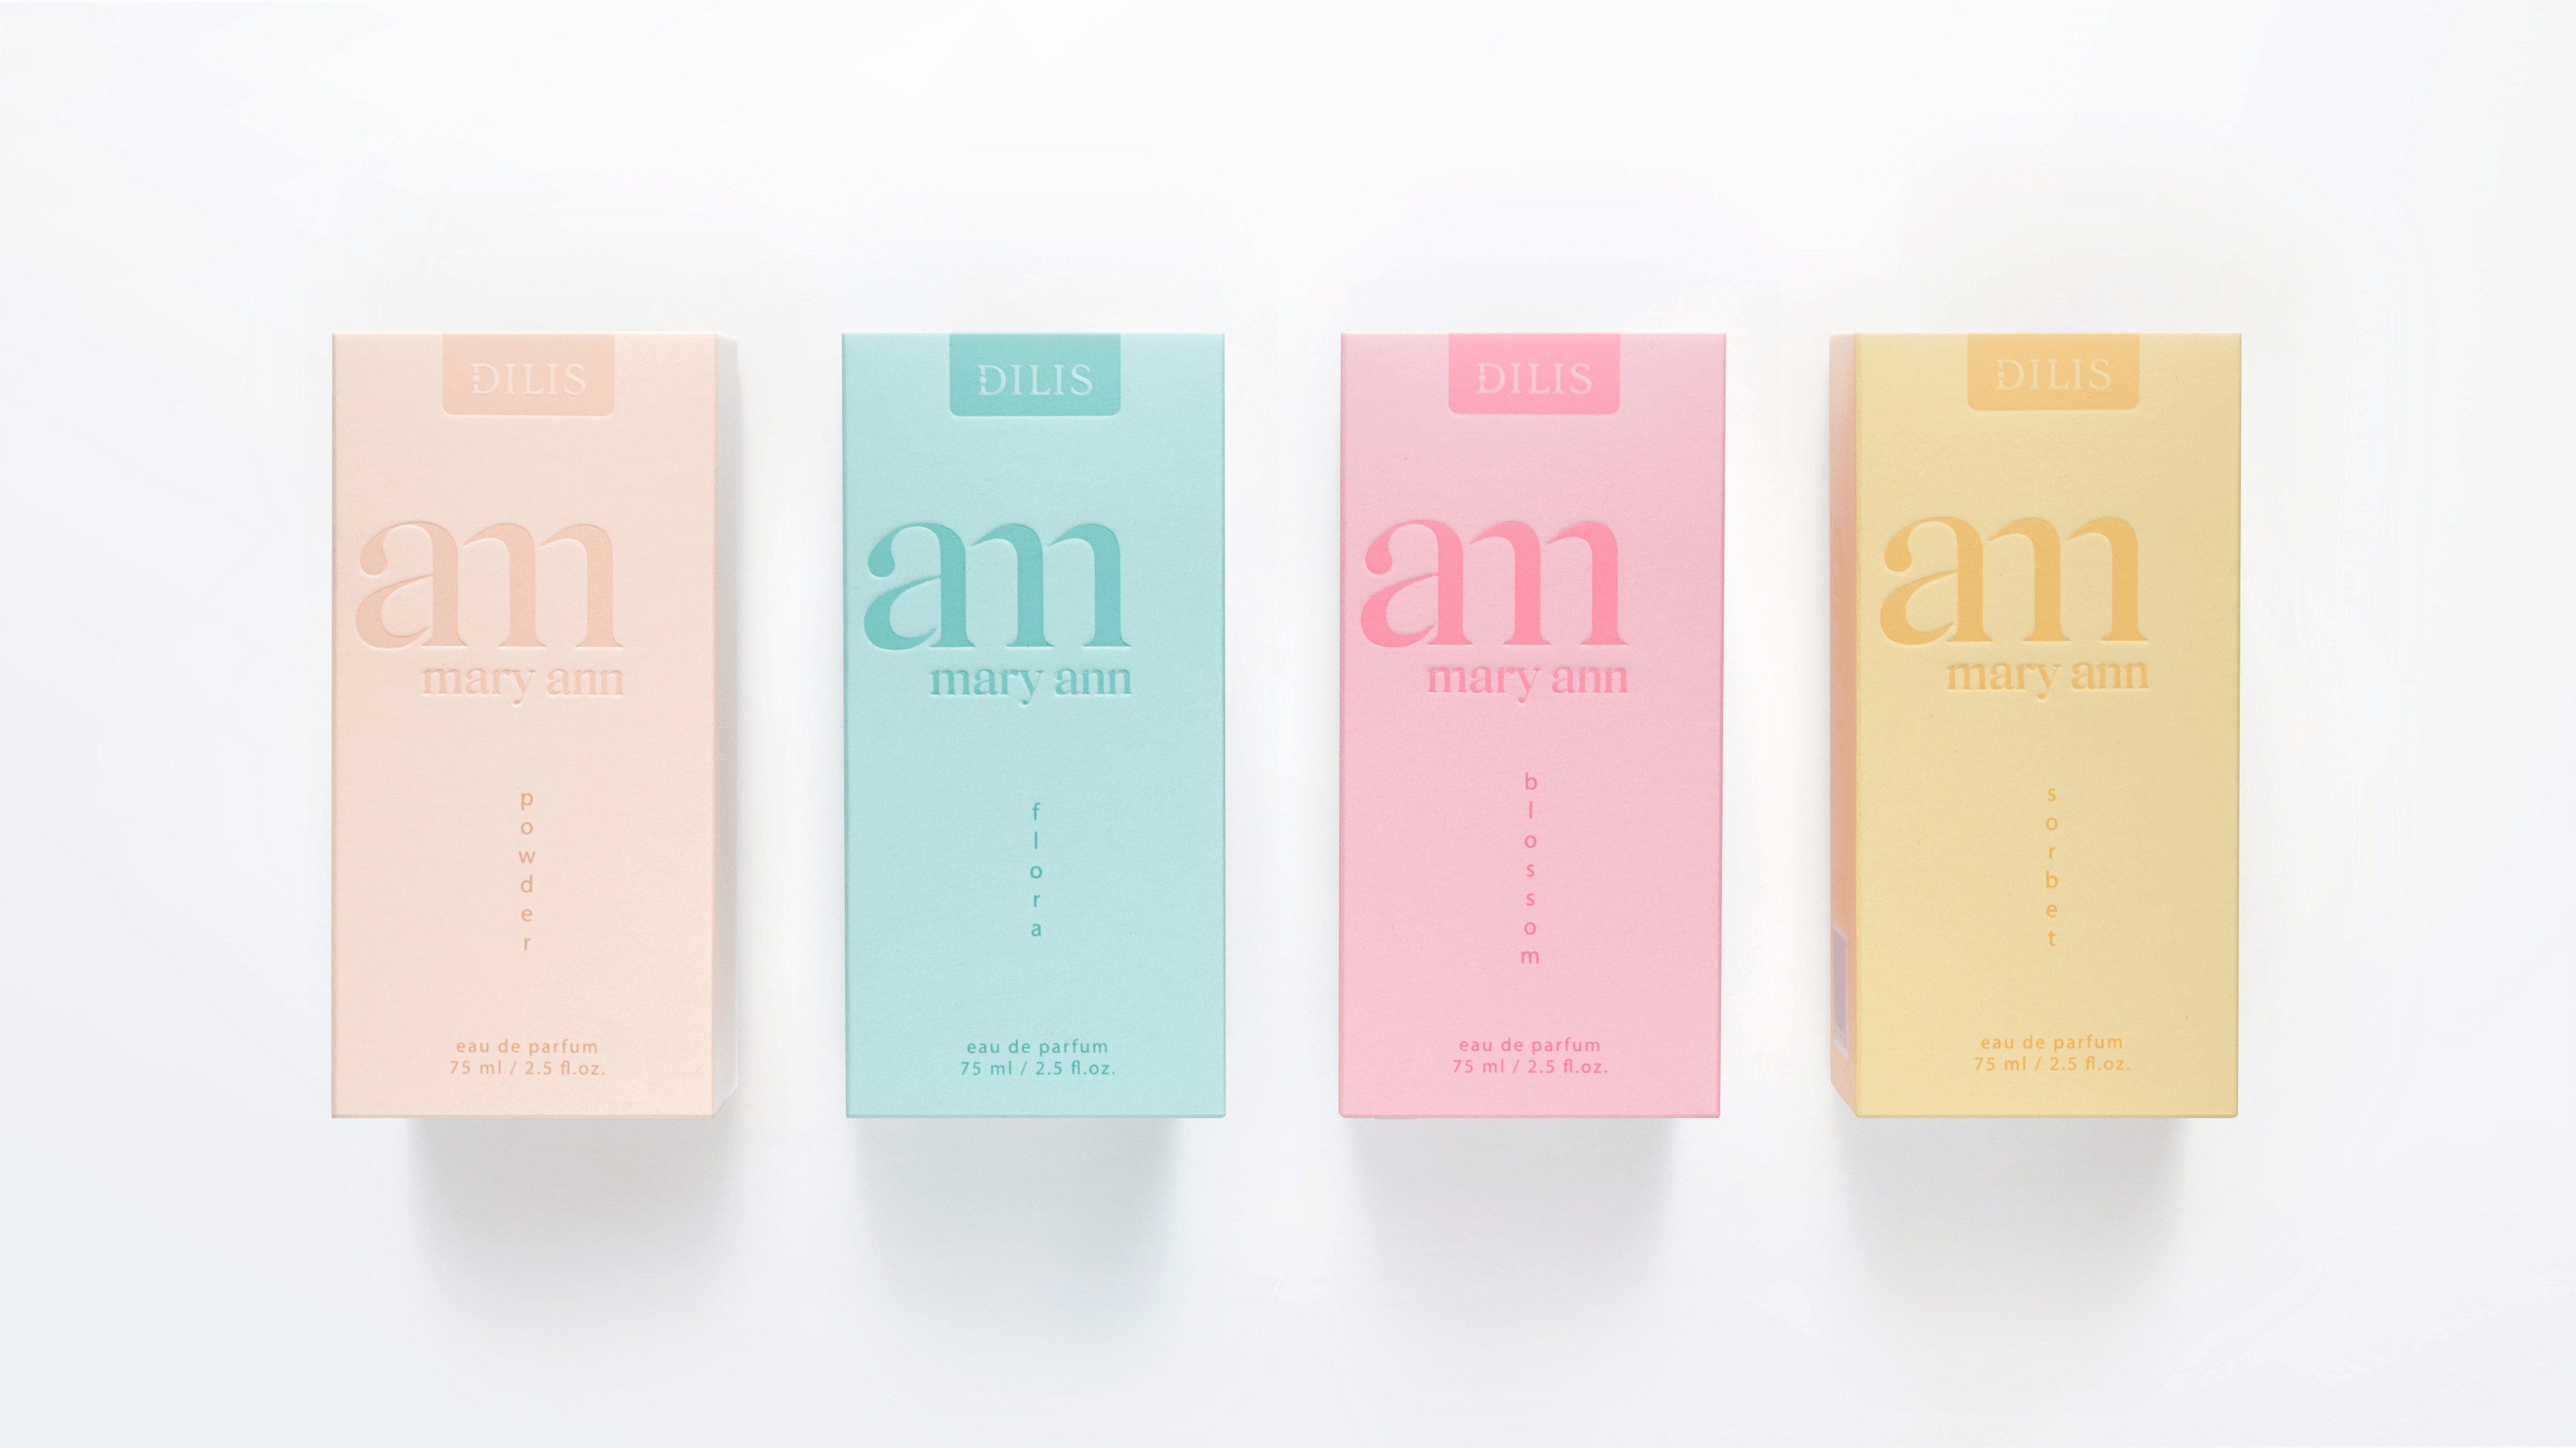 Design for the New Mary Ann Perfume Brand for Dilis